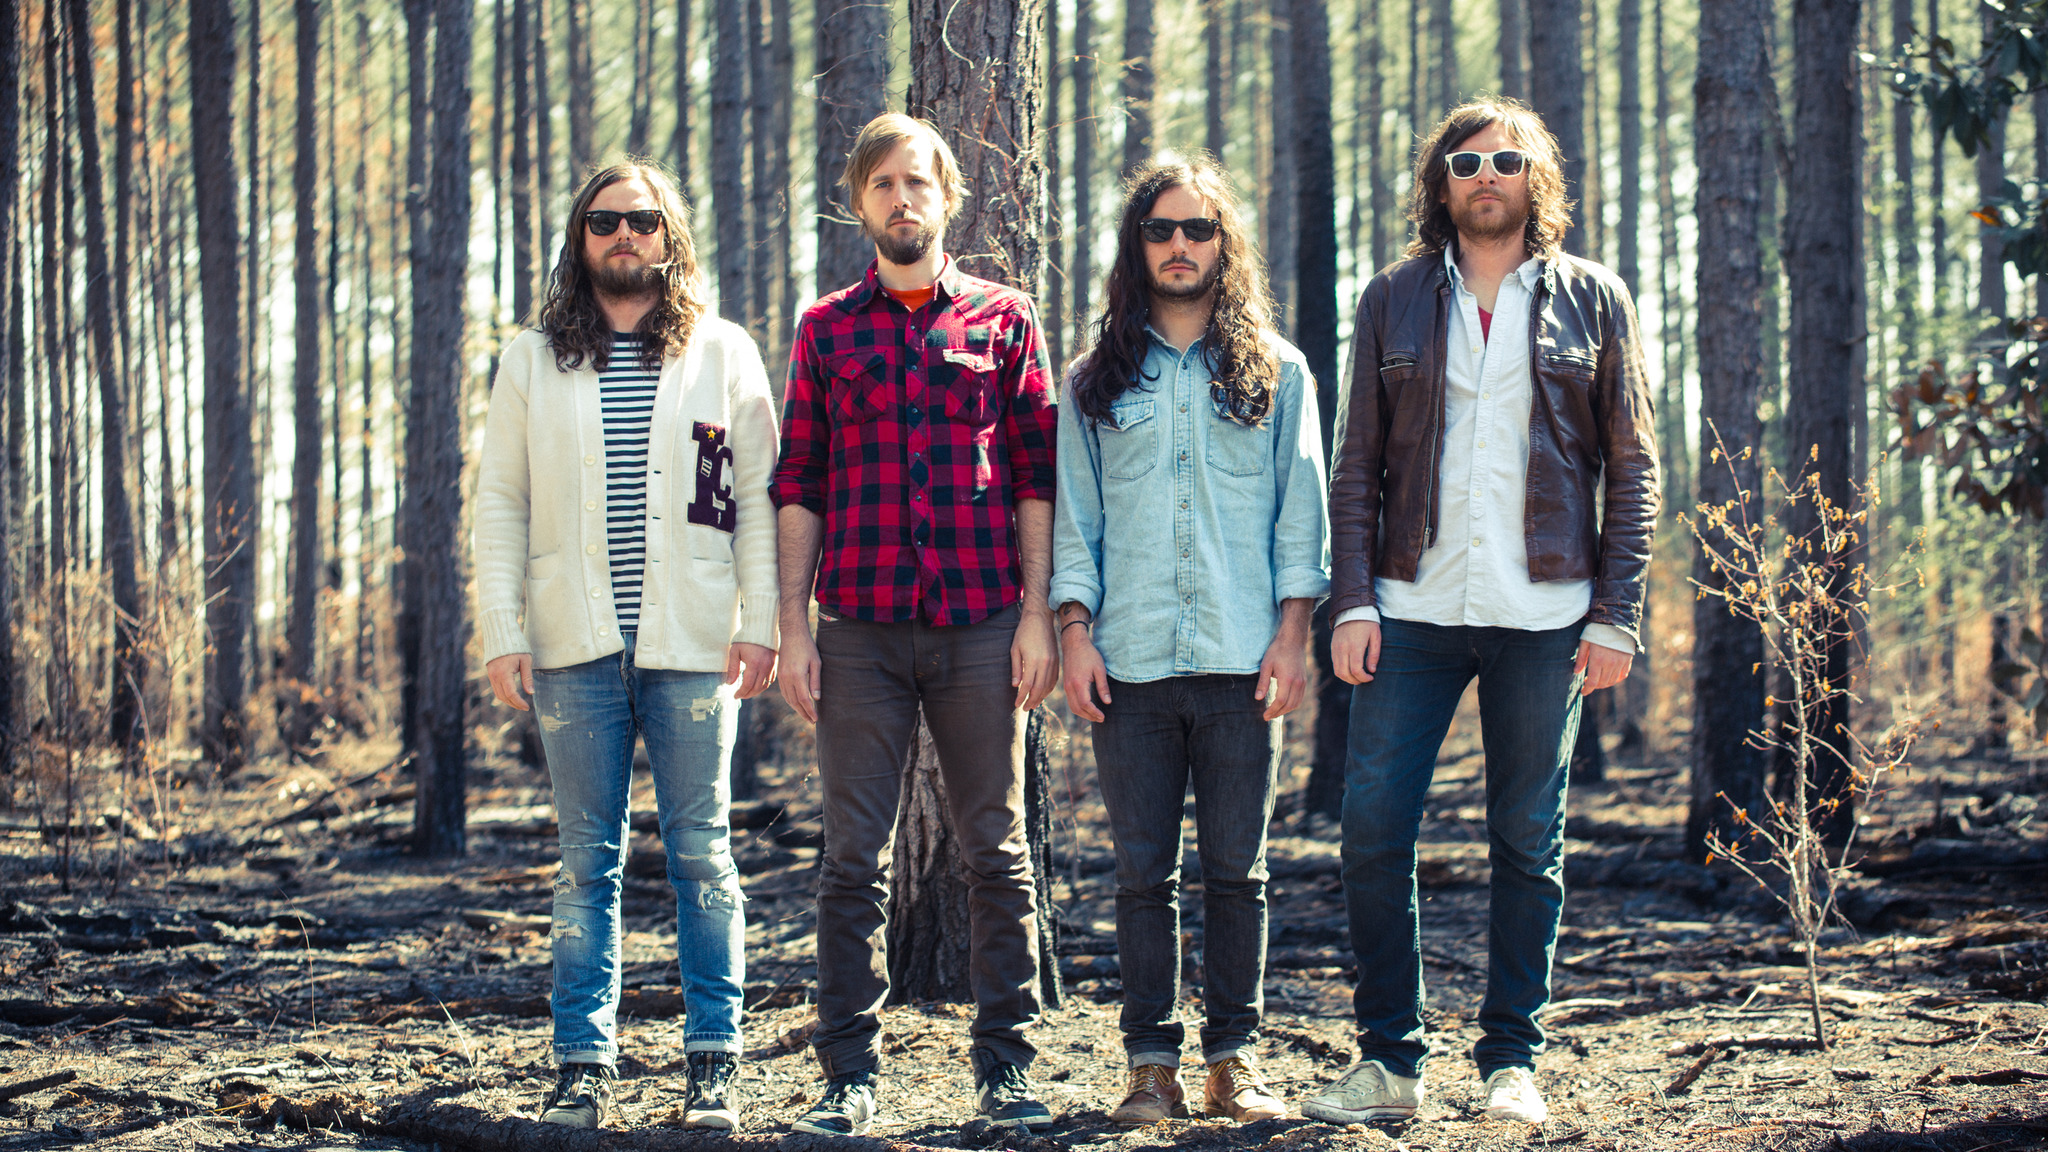 J. Roddy Walston & the Business Tickets, 2022 Concert Tour Dates